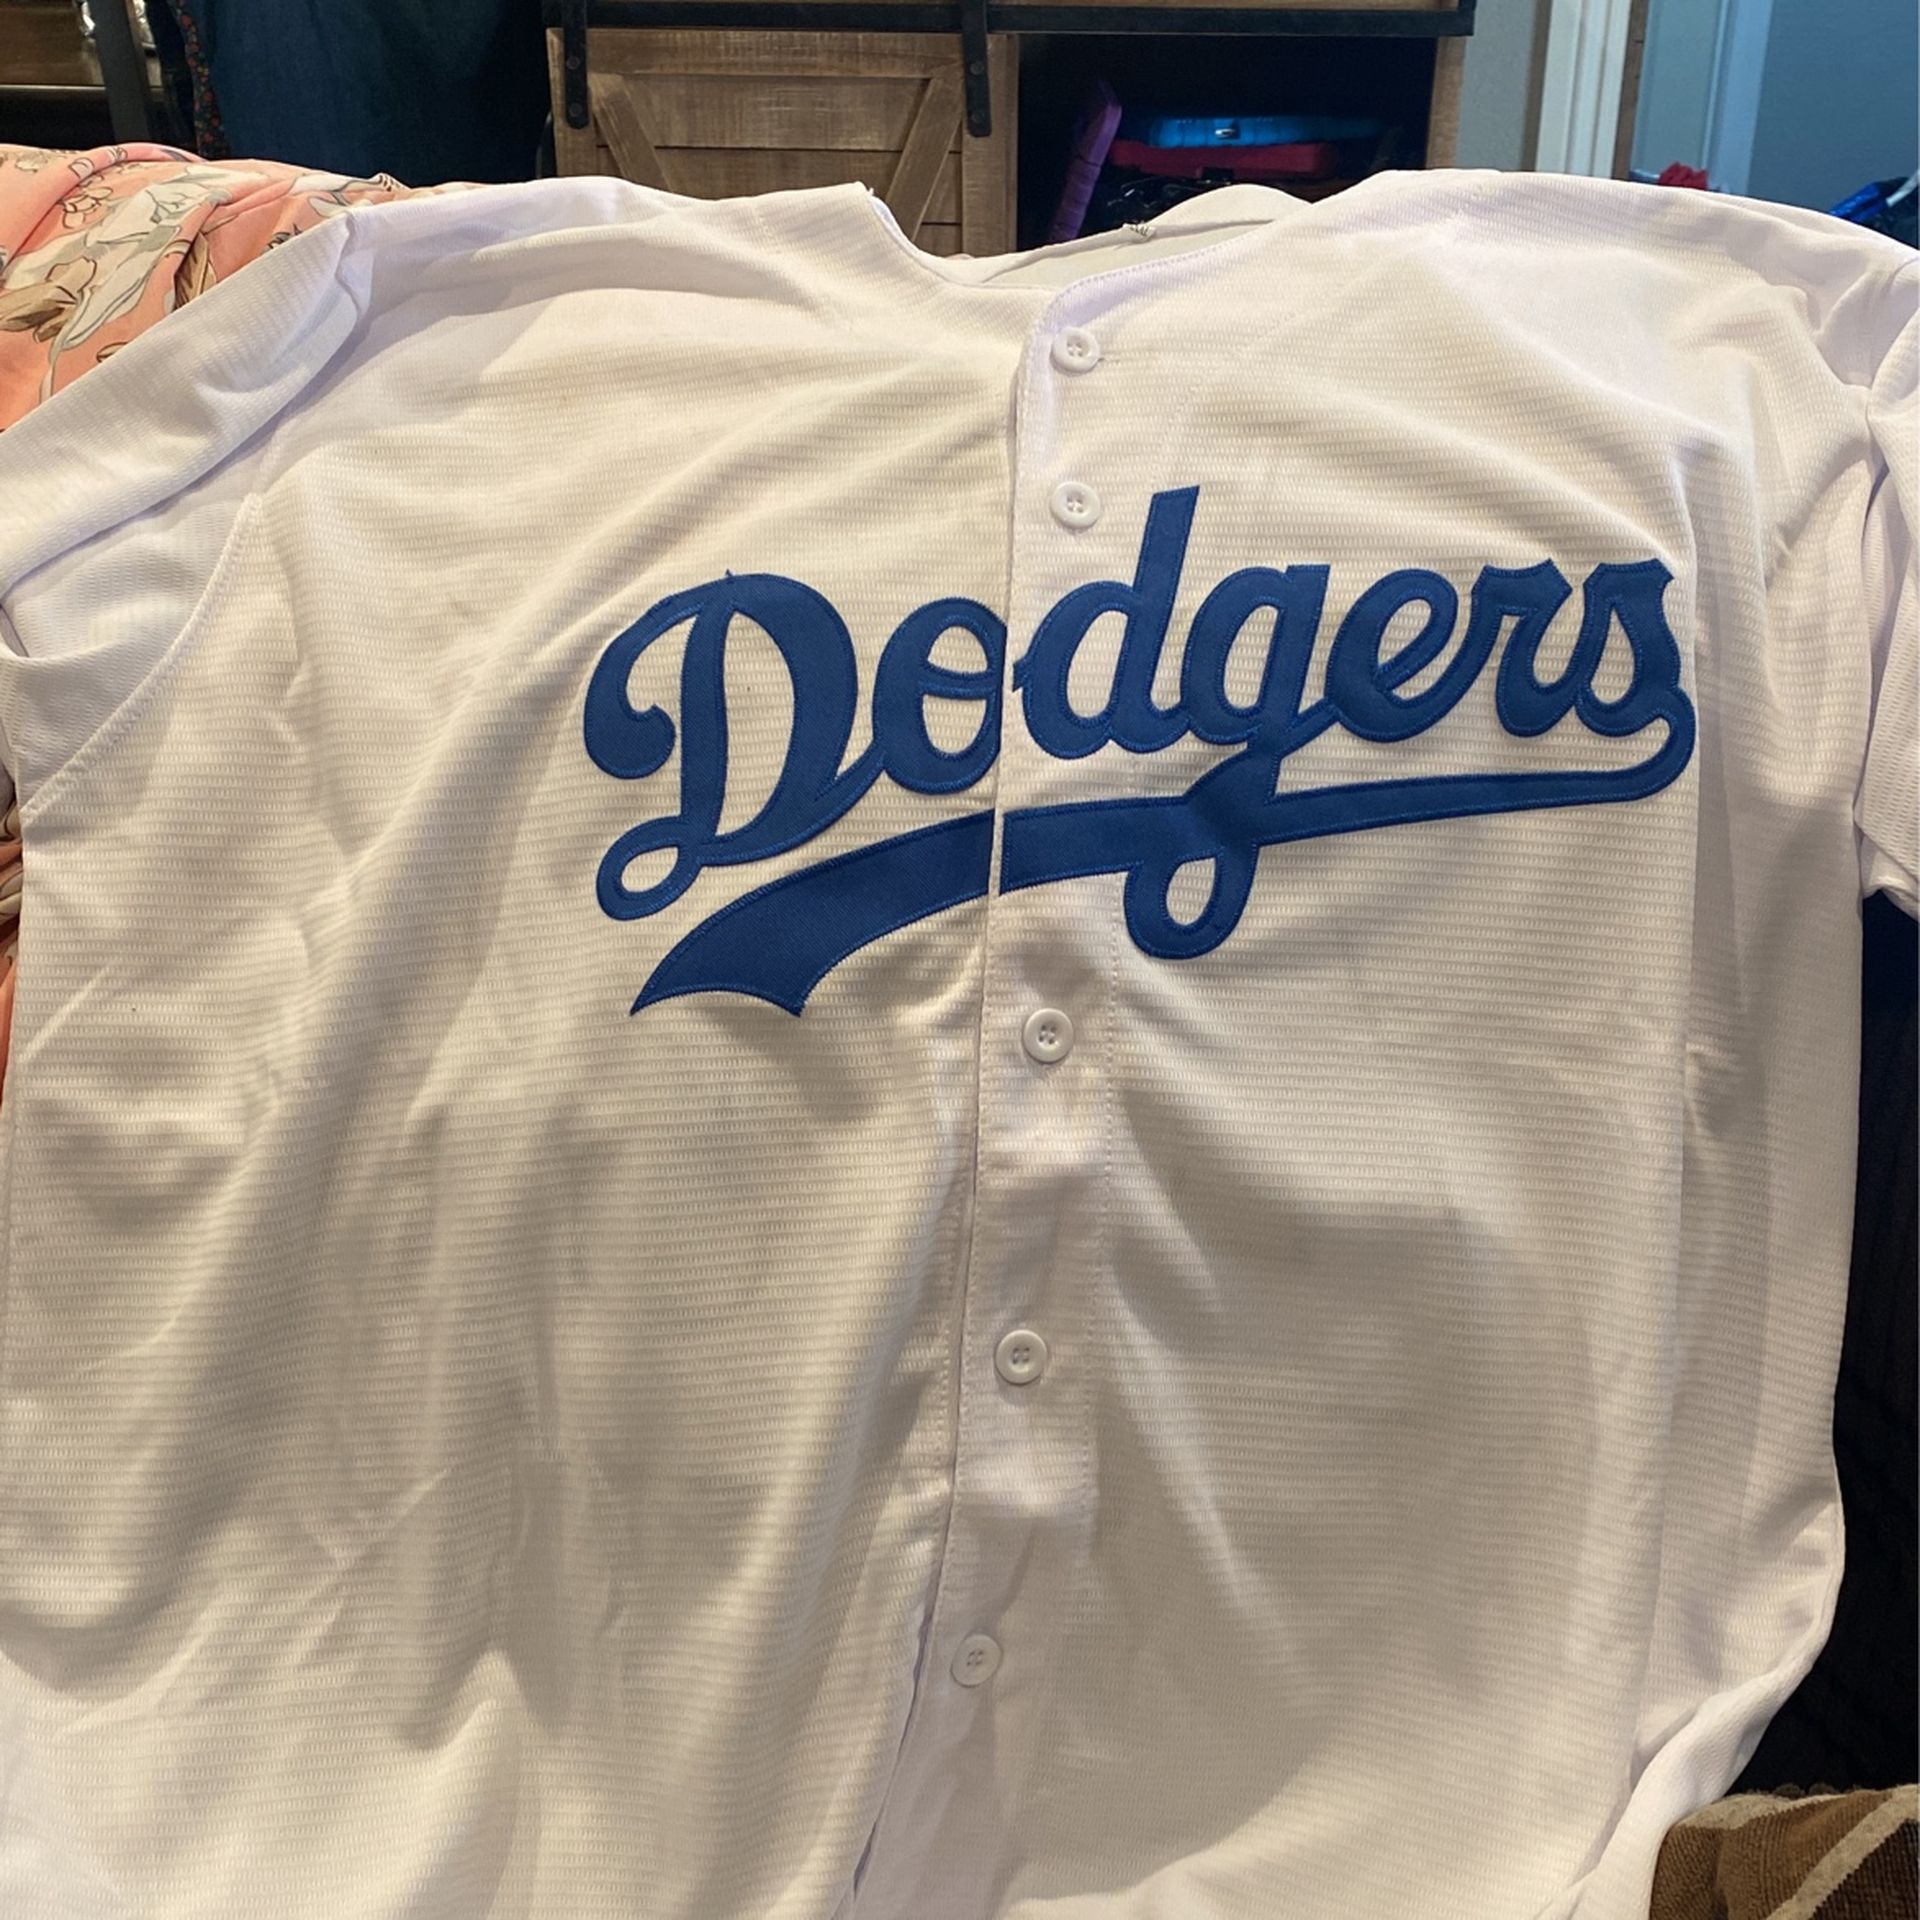 Inspired Dodger Jersey #43 Rios for Sale in Rialto, CA - OfferUp